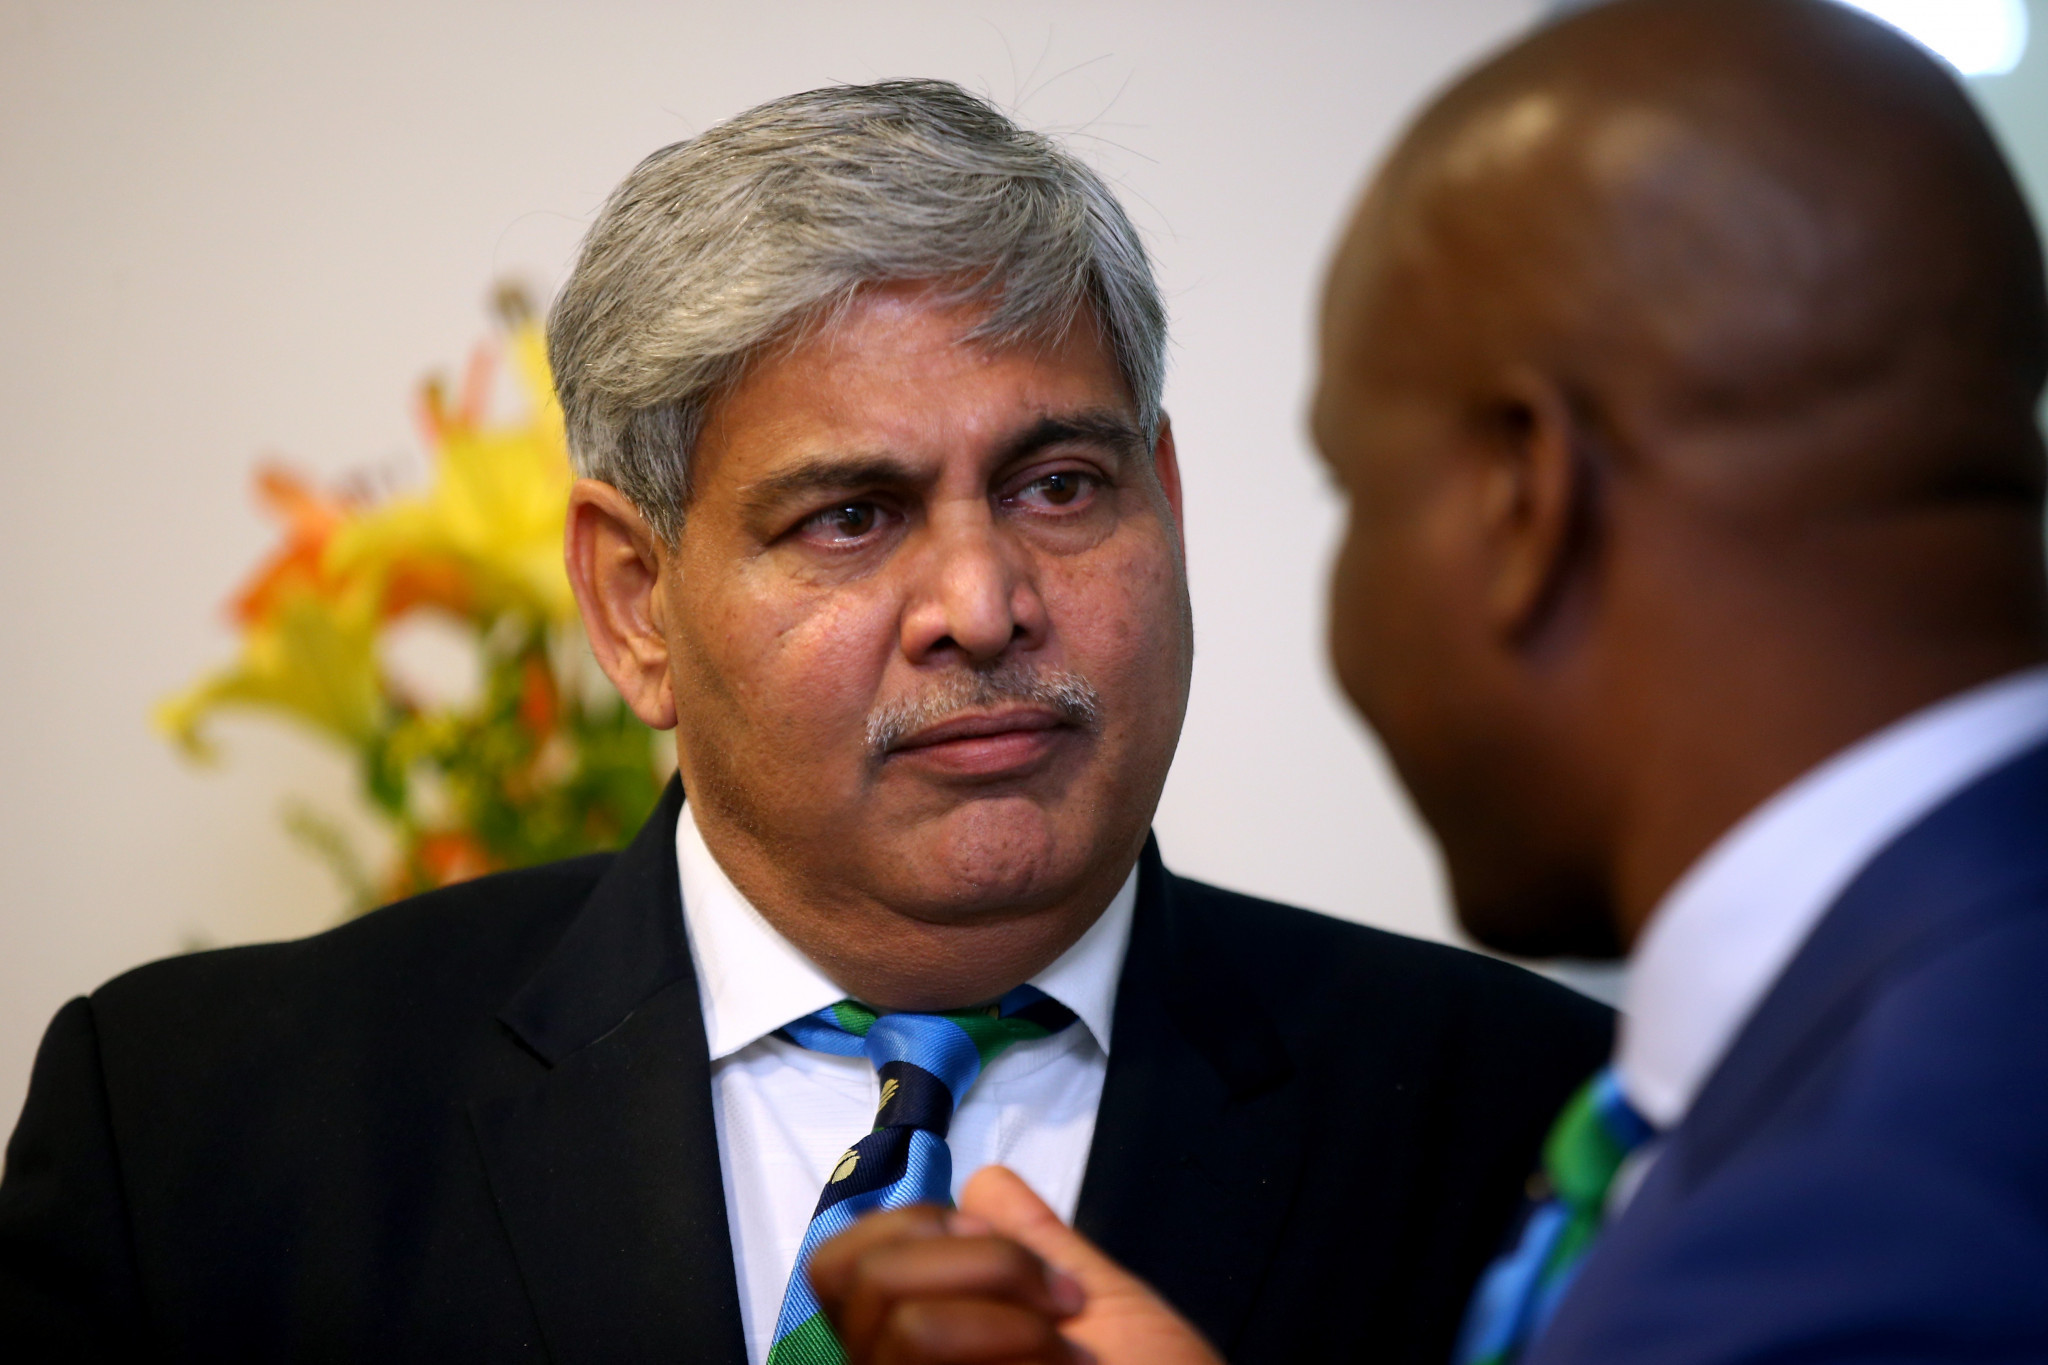 ICC chairman Shashank Manohar said what had happened in Zimbabwe represented a serious breach of the constitution ©Getty Images